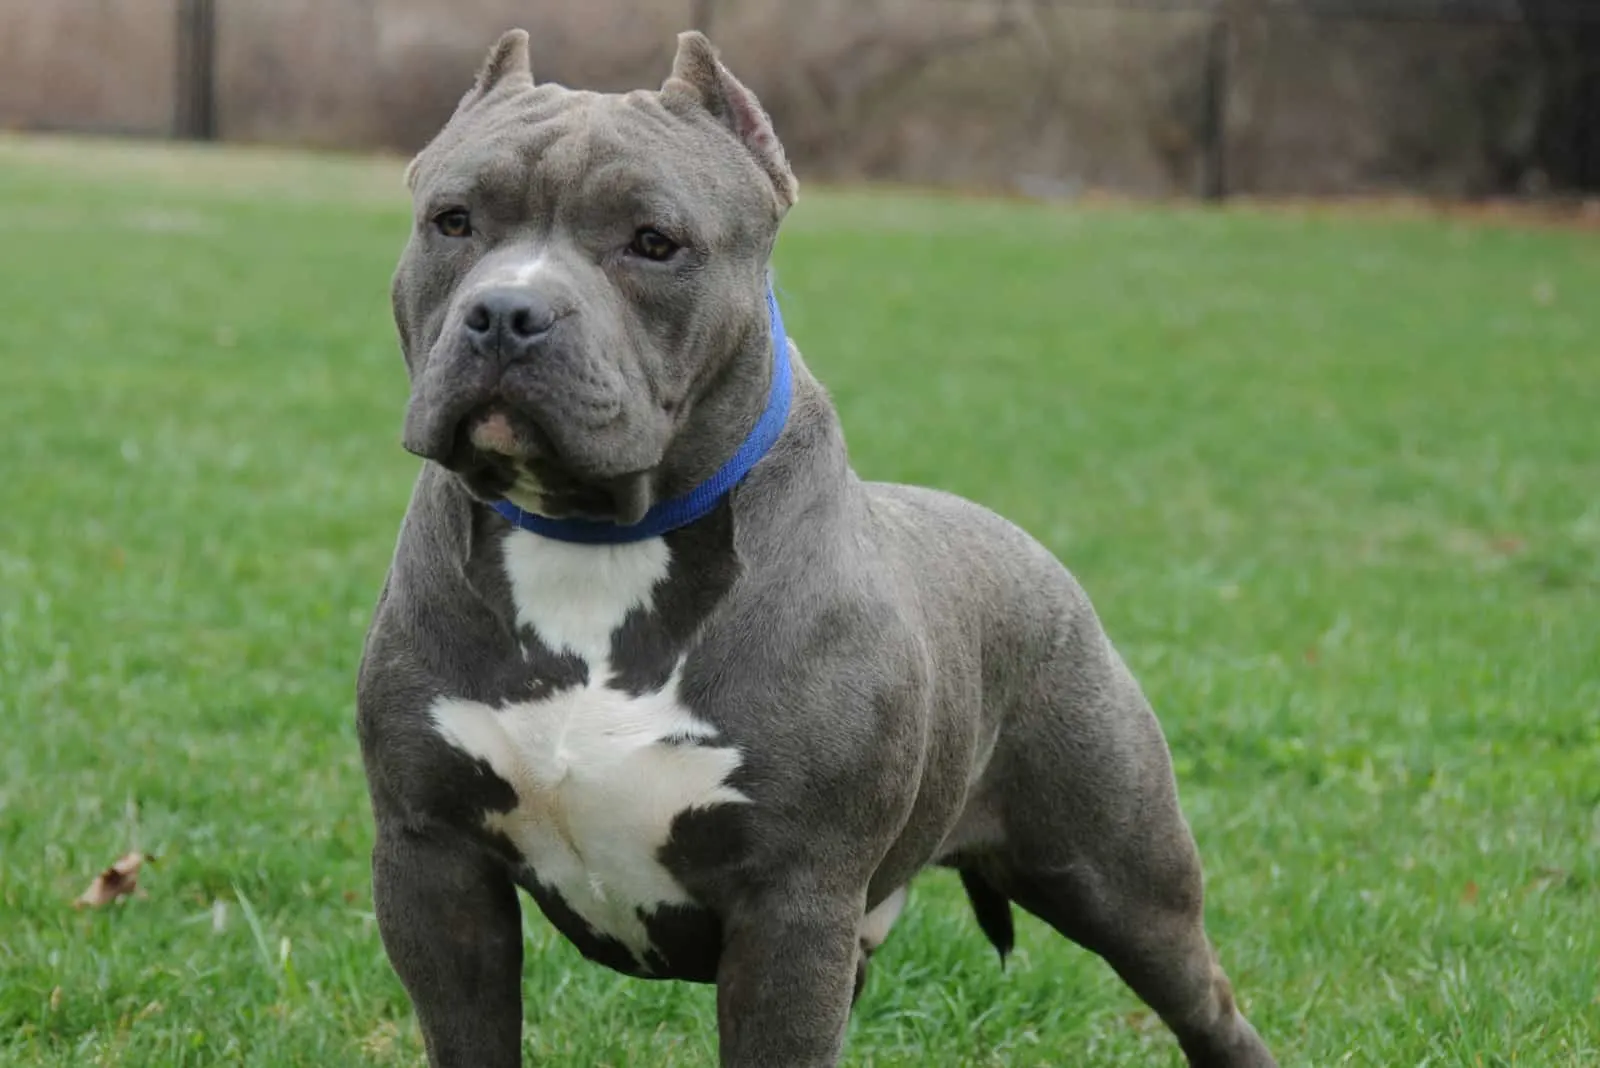 Blue American Bully standing on grass looking away